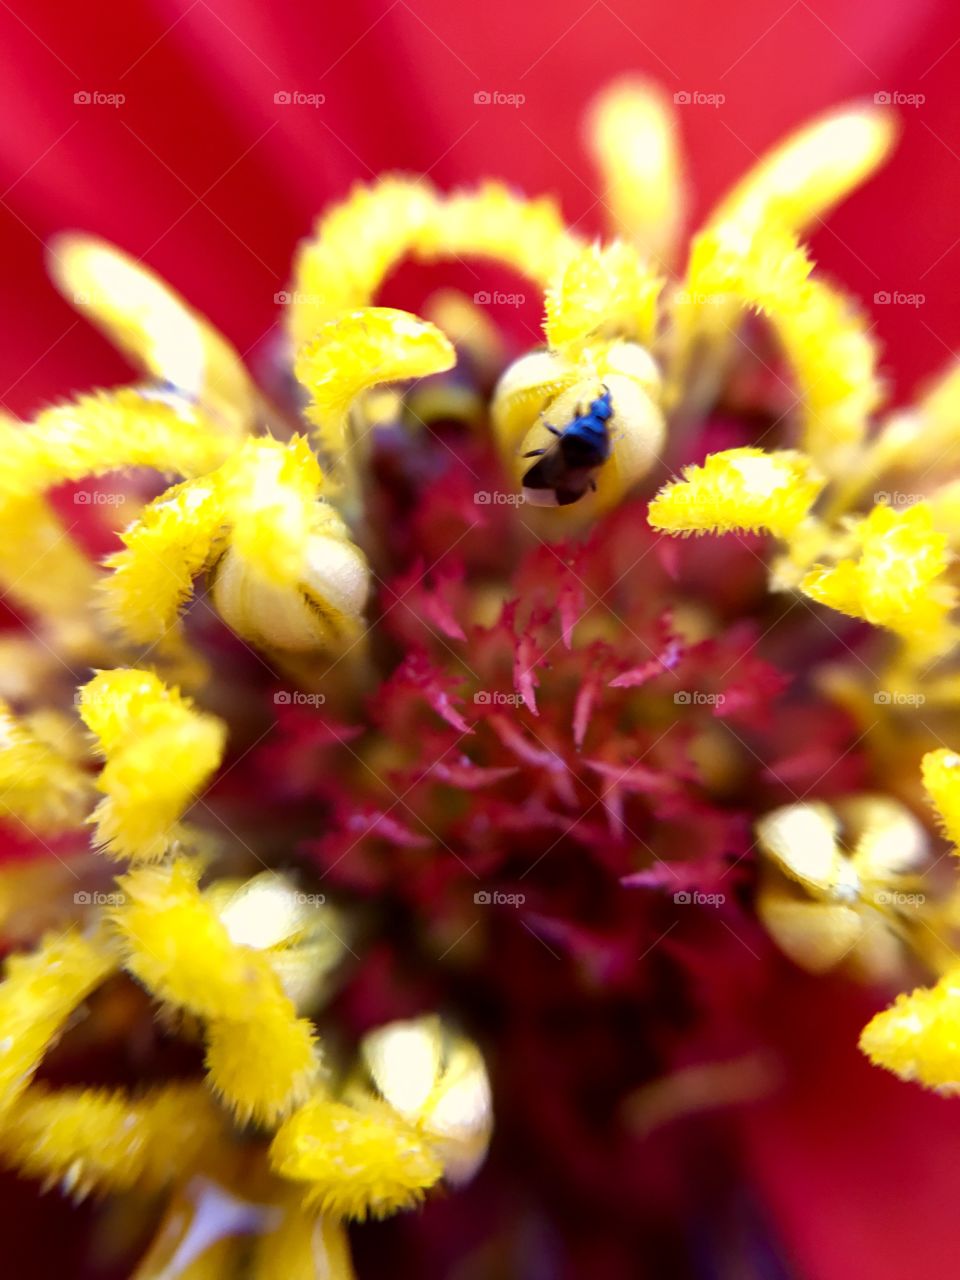 Bug on pistil and yellow stamen of a red flower.